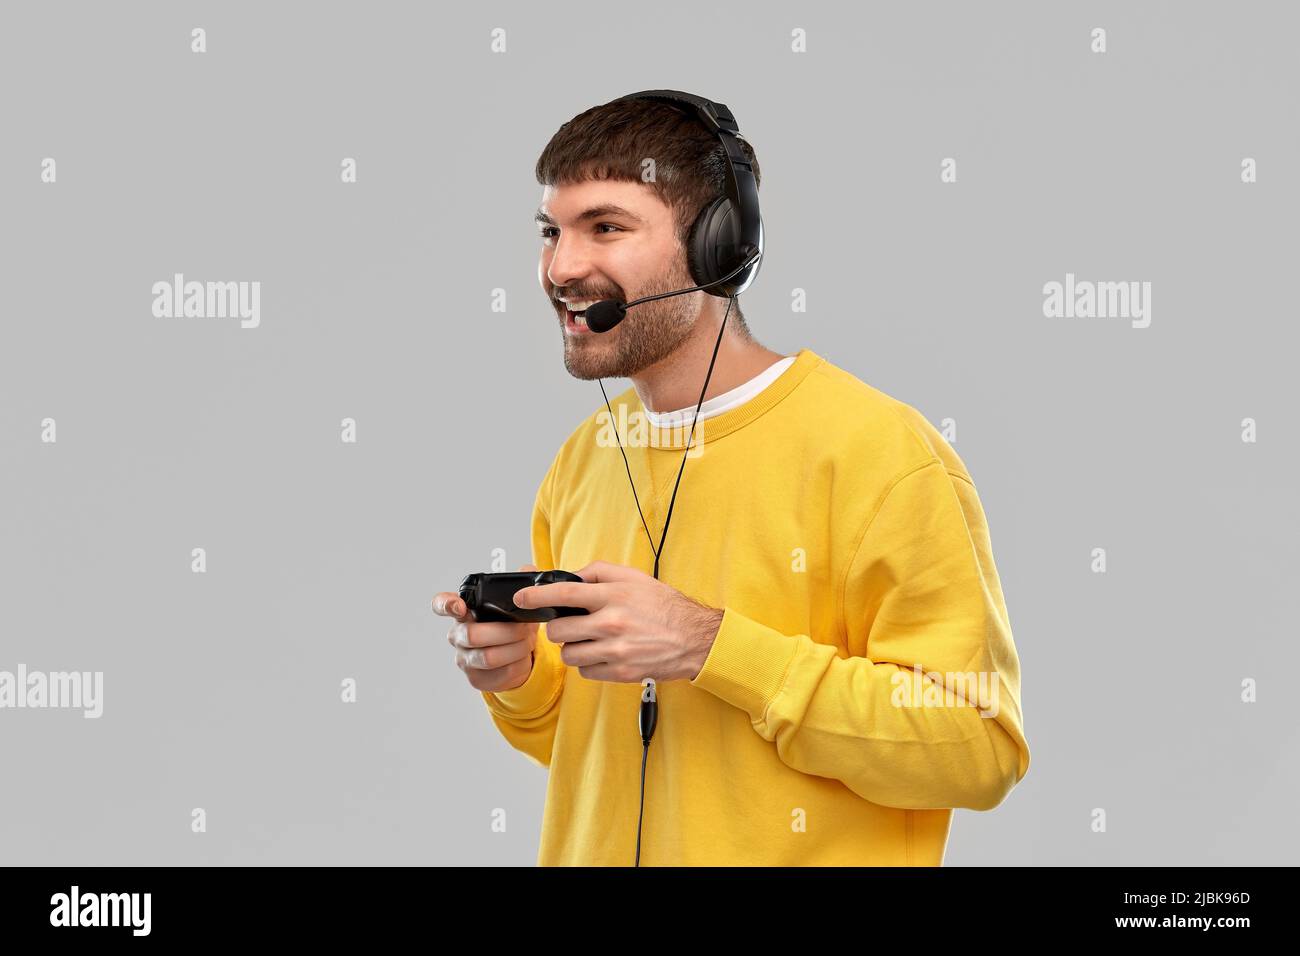 man with headset and gamepad playing video game Stock Photo